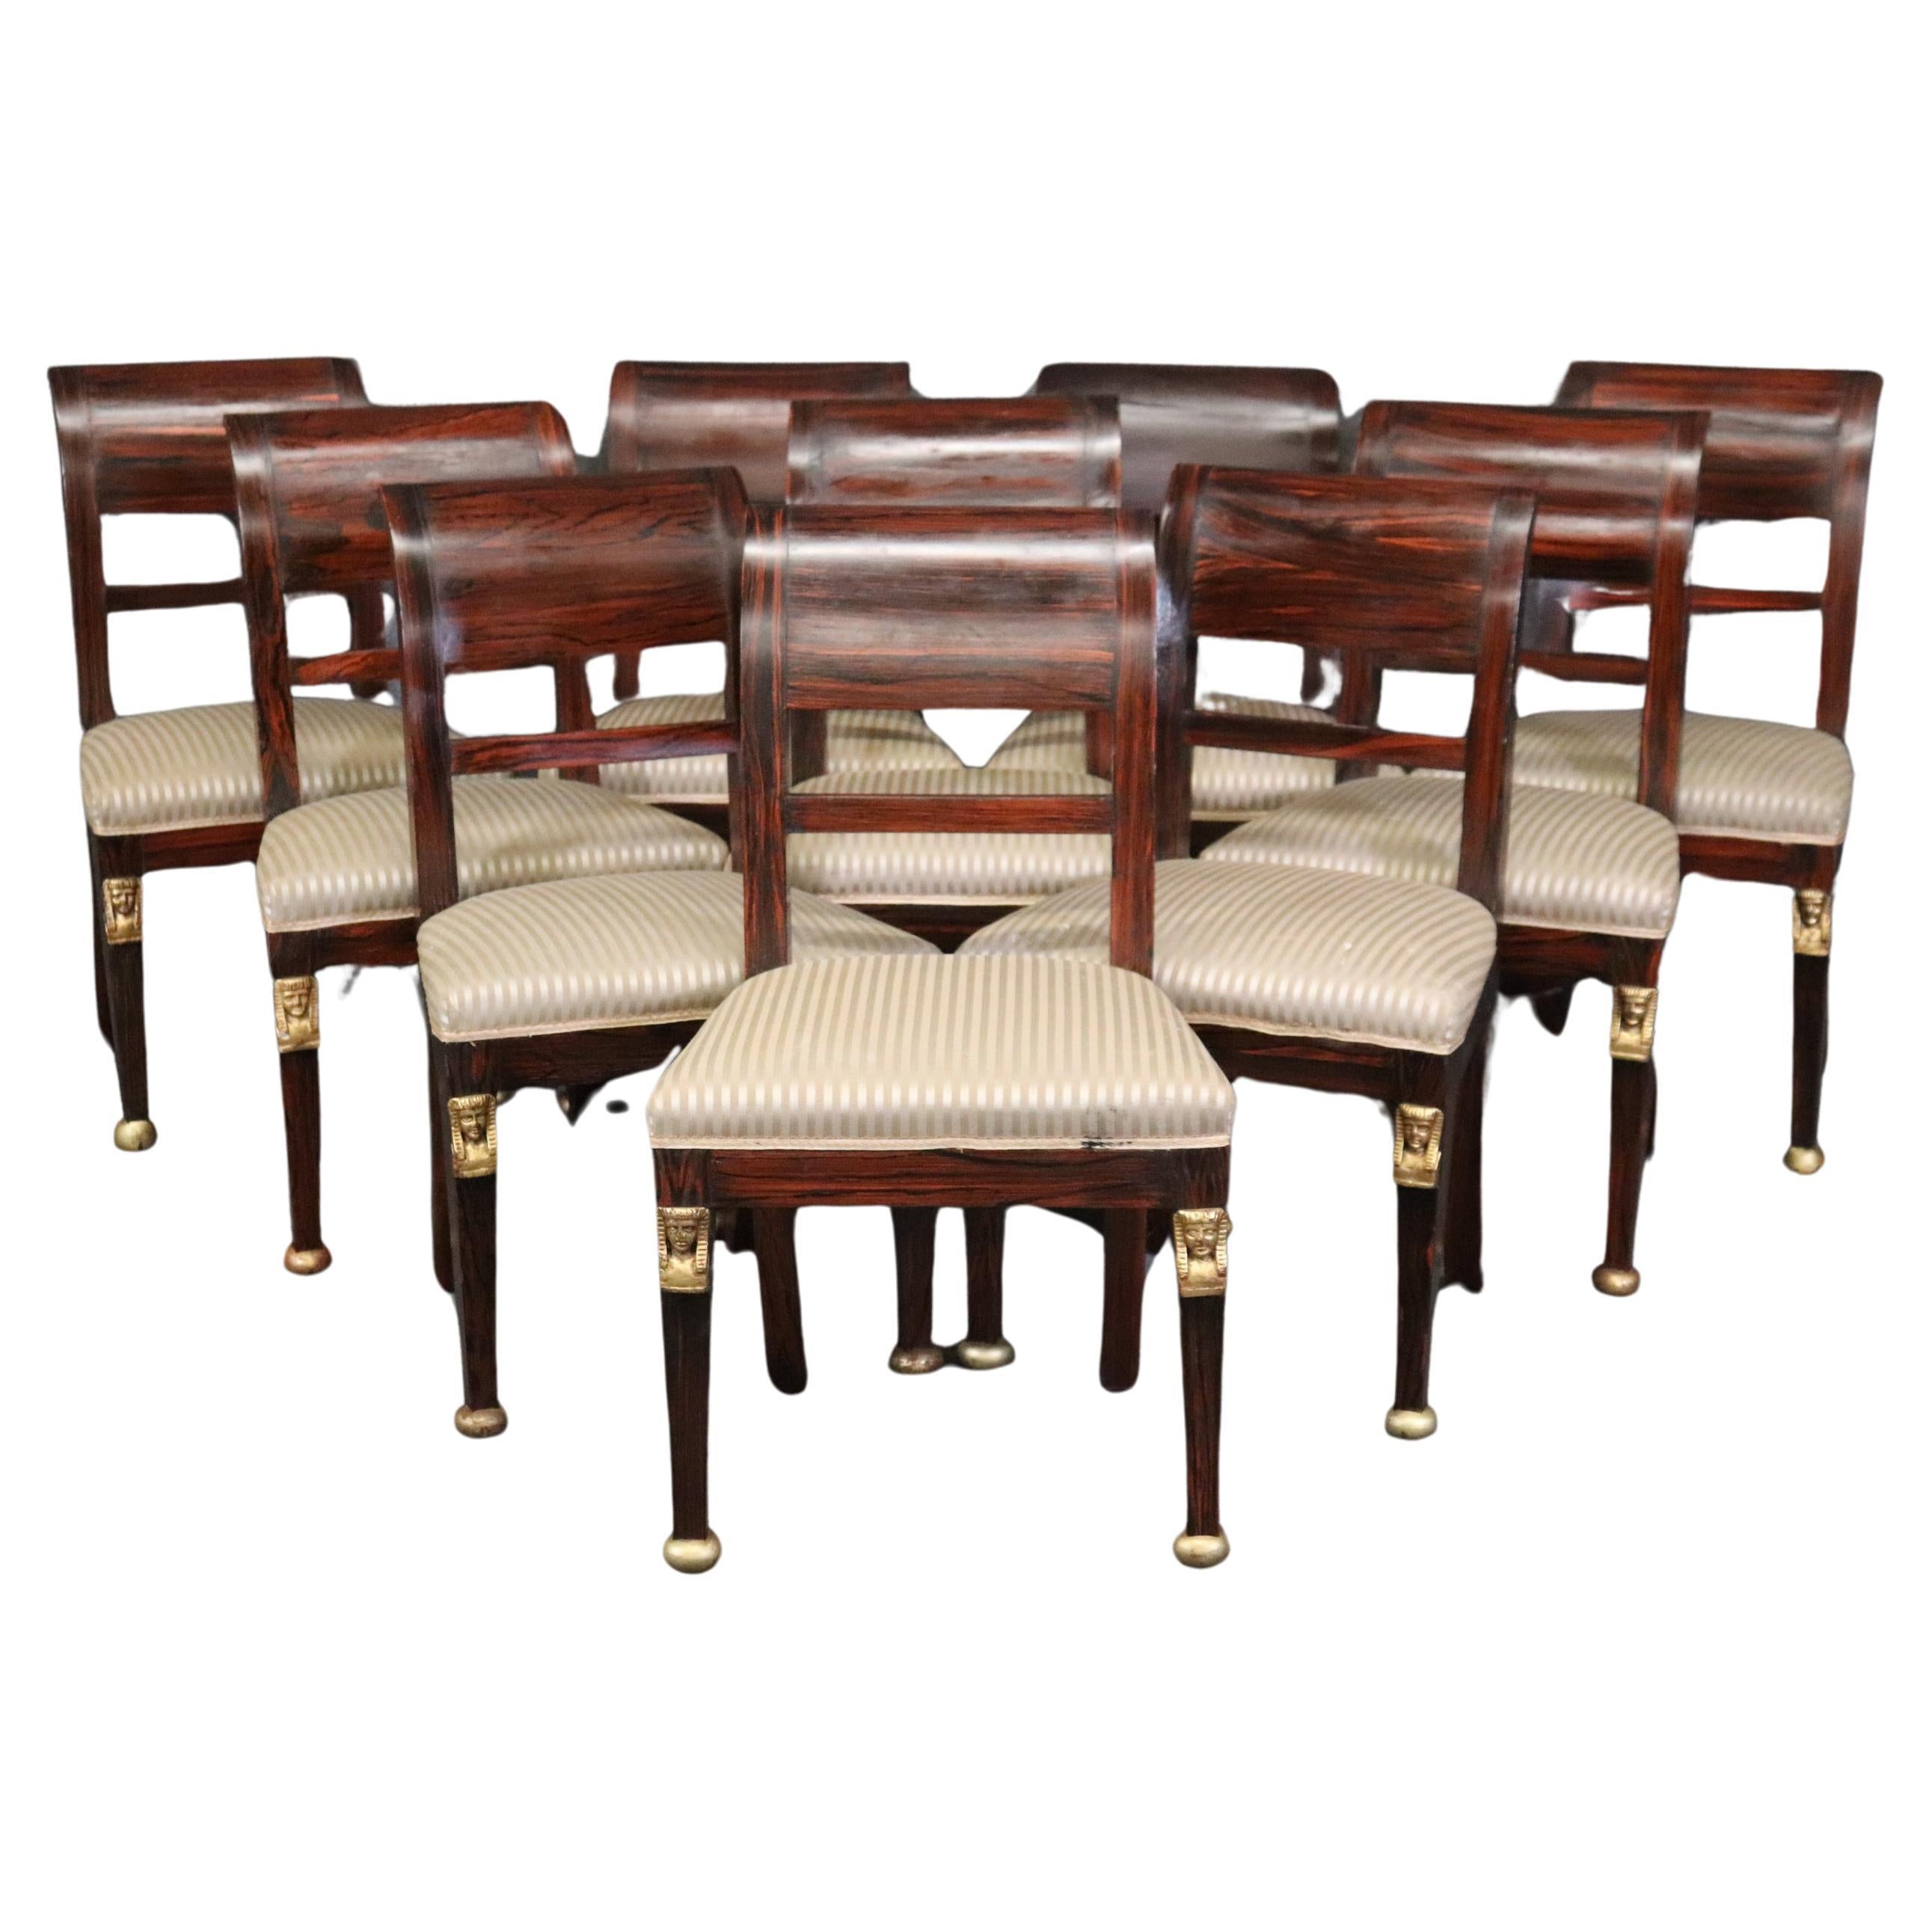 10 Antique French Empire Style Rosewood Dining Chairs, Side Chairs For Sale